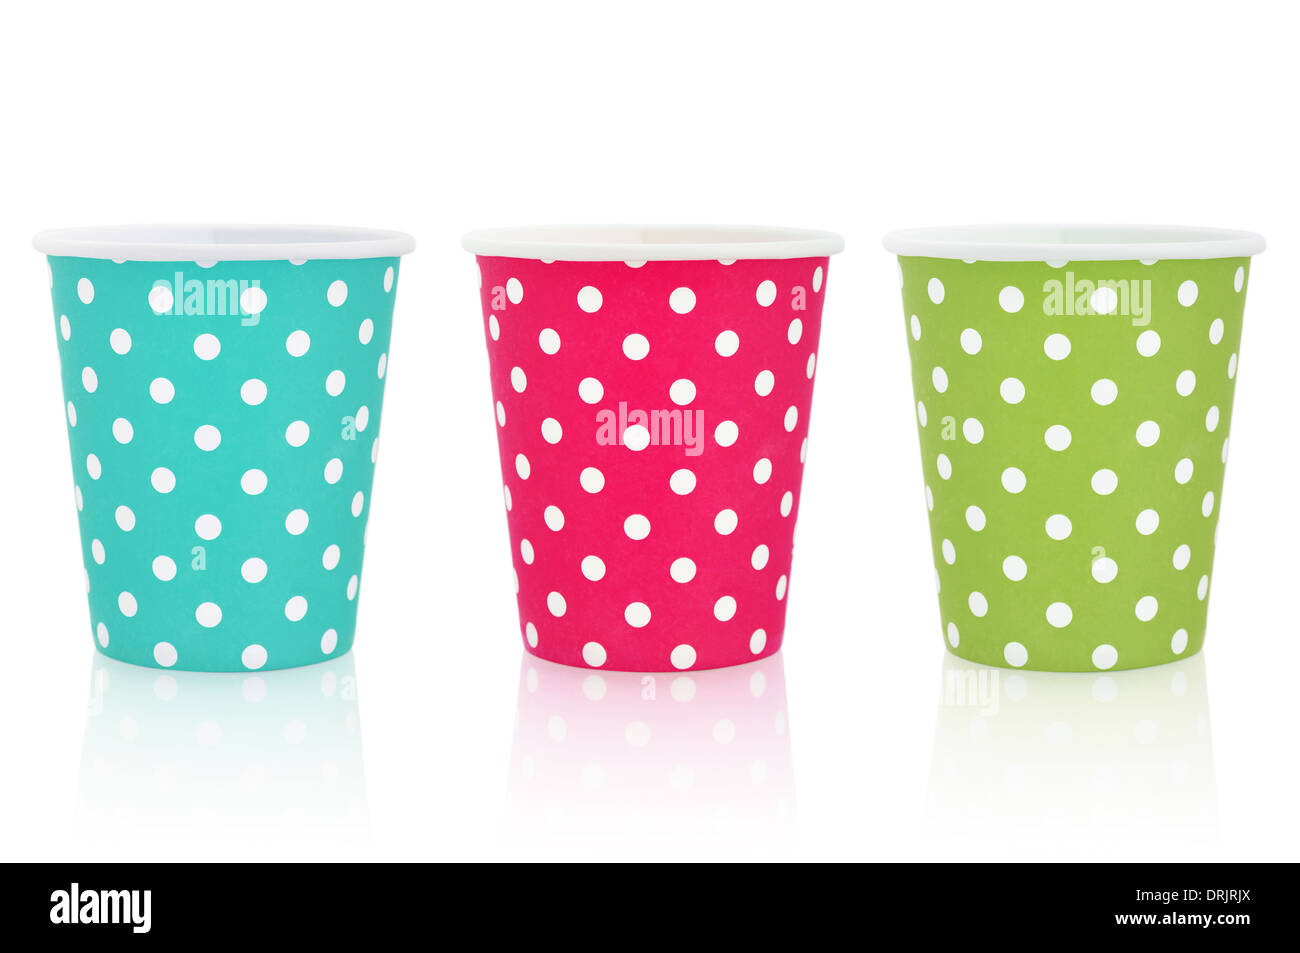 Colorful polka dot paper cups isolated on white. Stock Photo